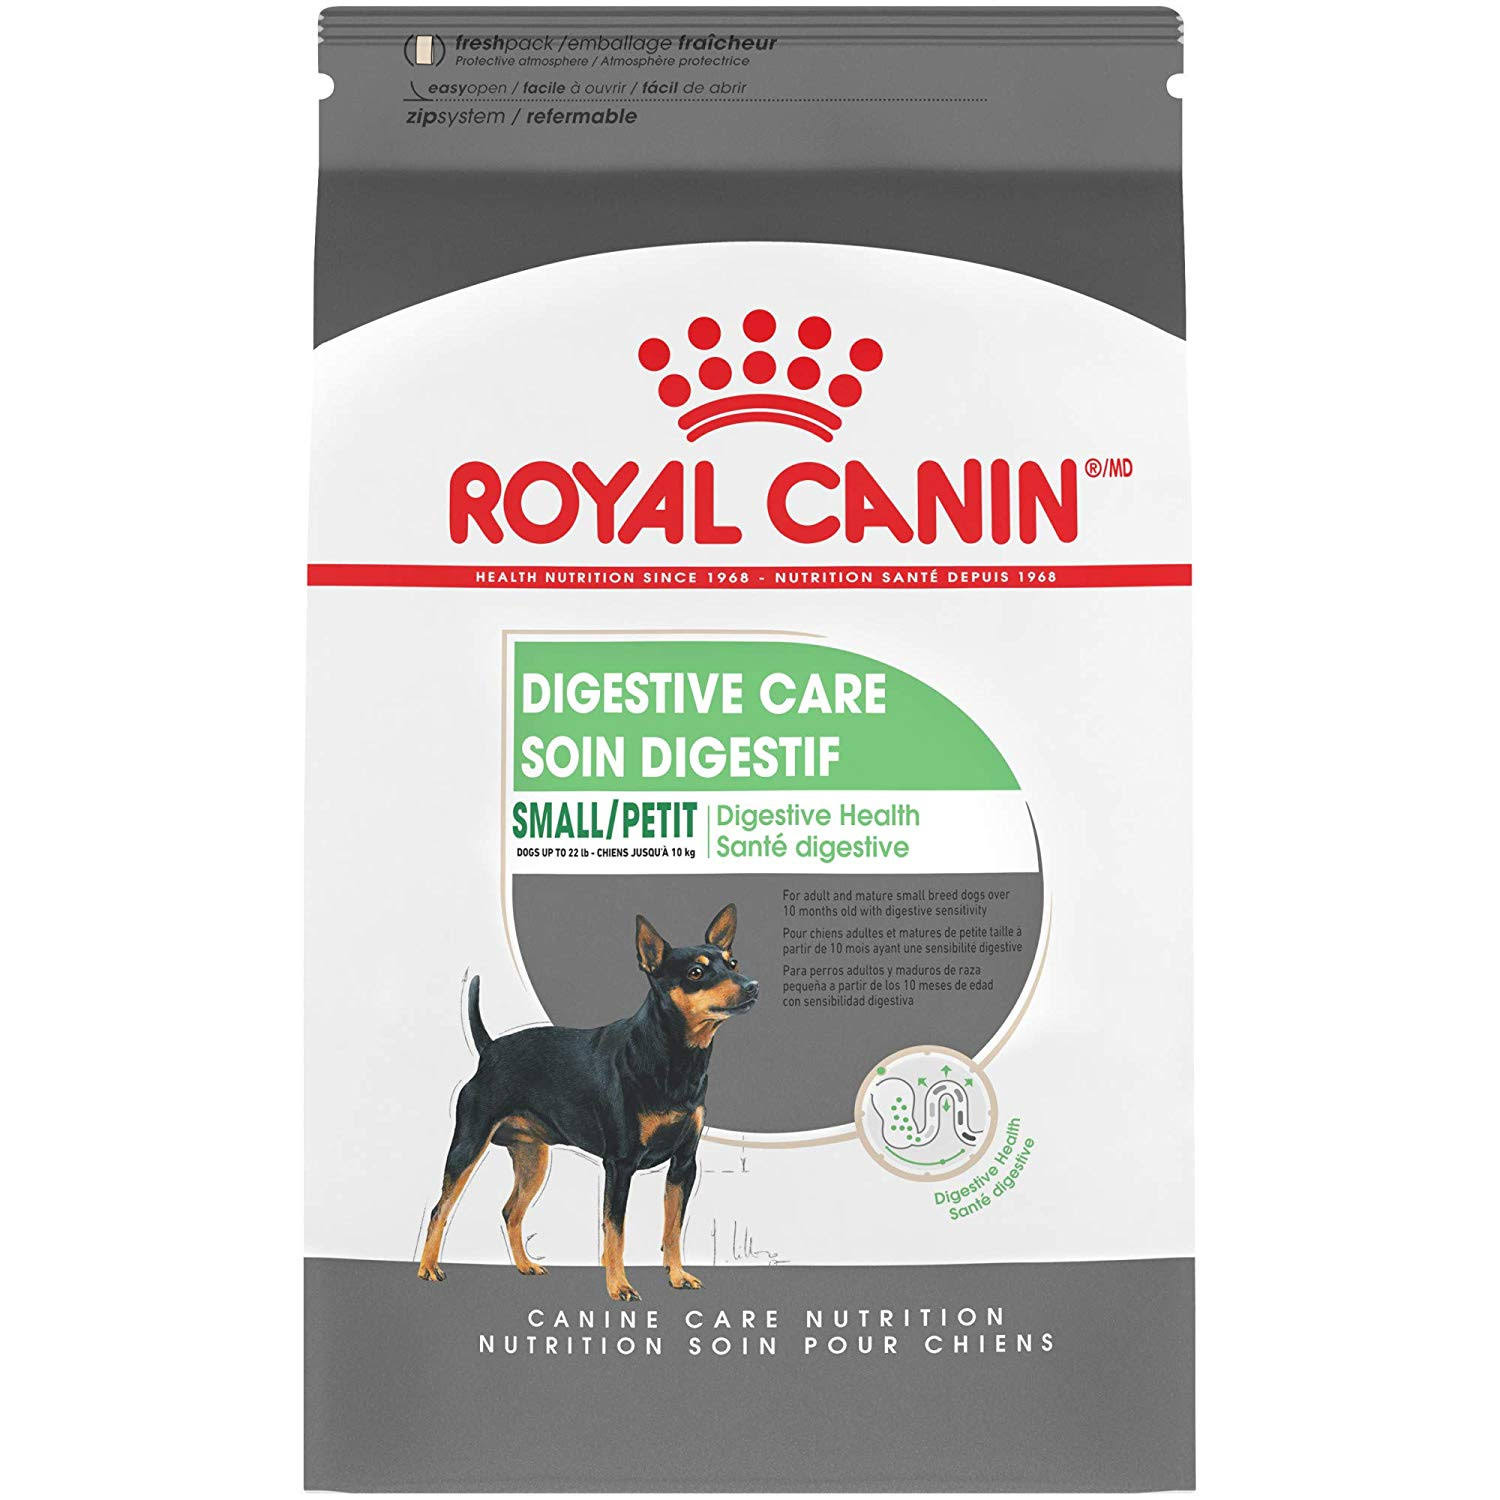 Royal Canin Size Health Nutrition Mini Special Dry Dog Food